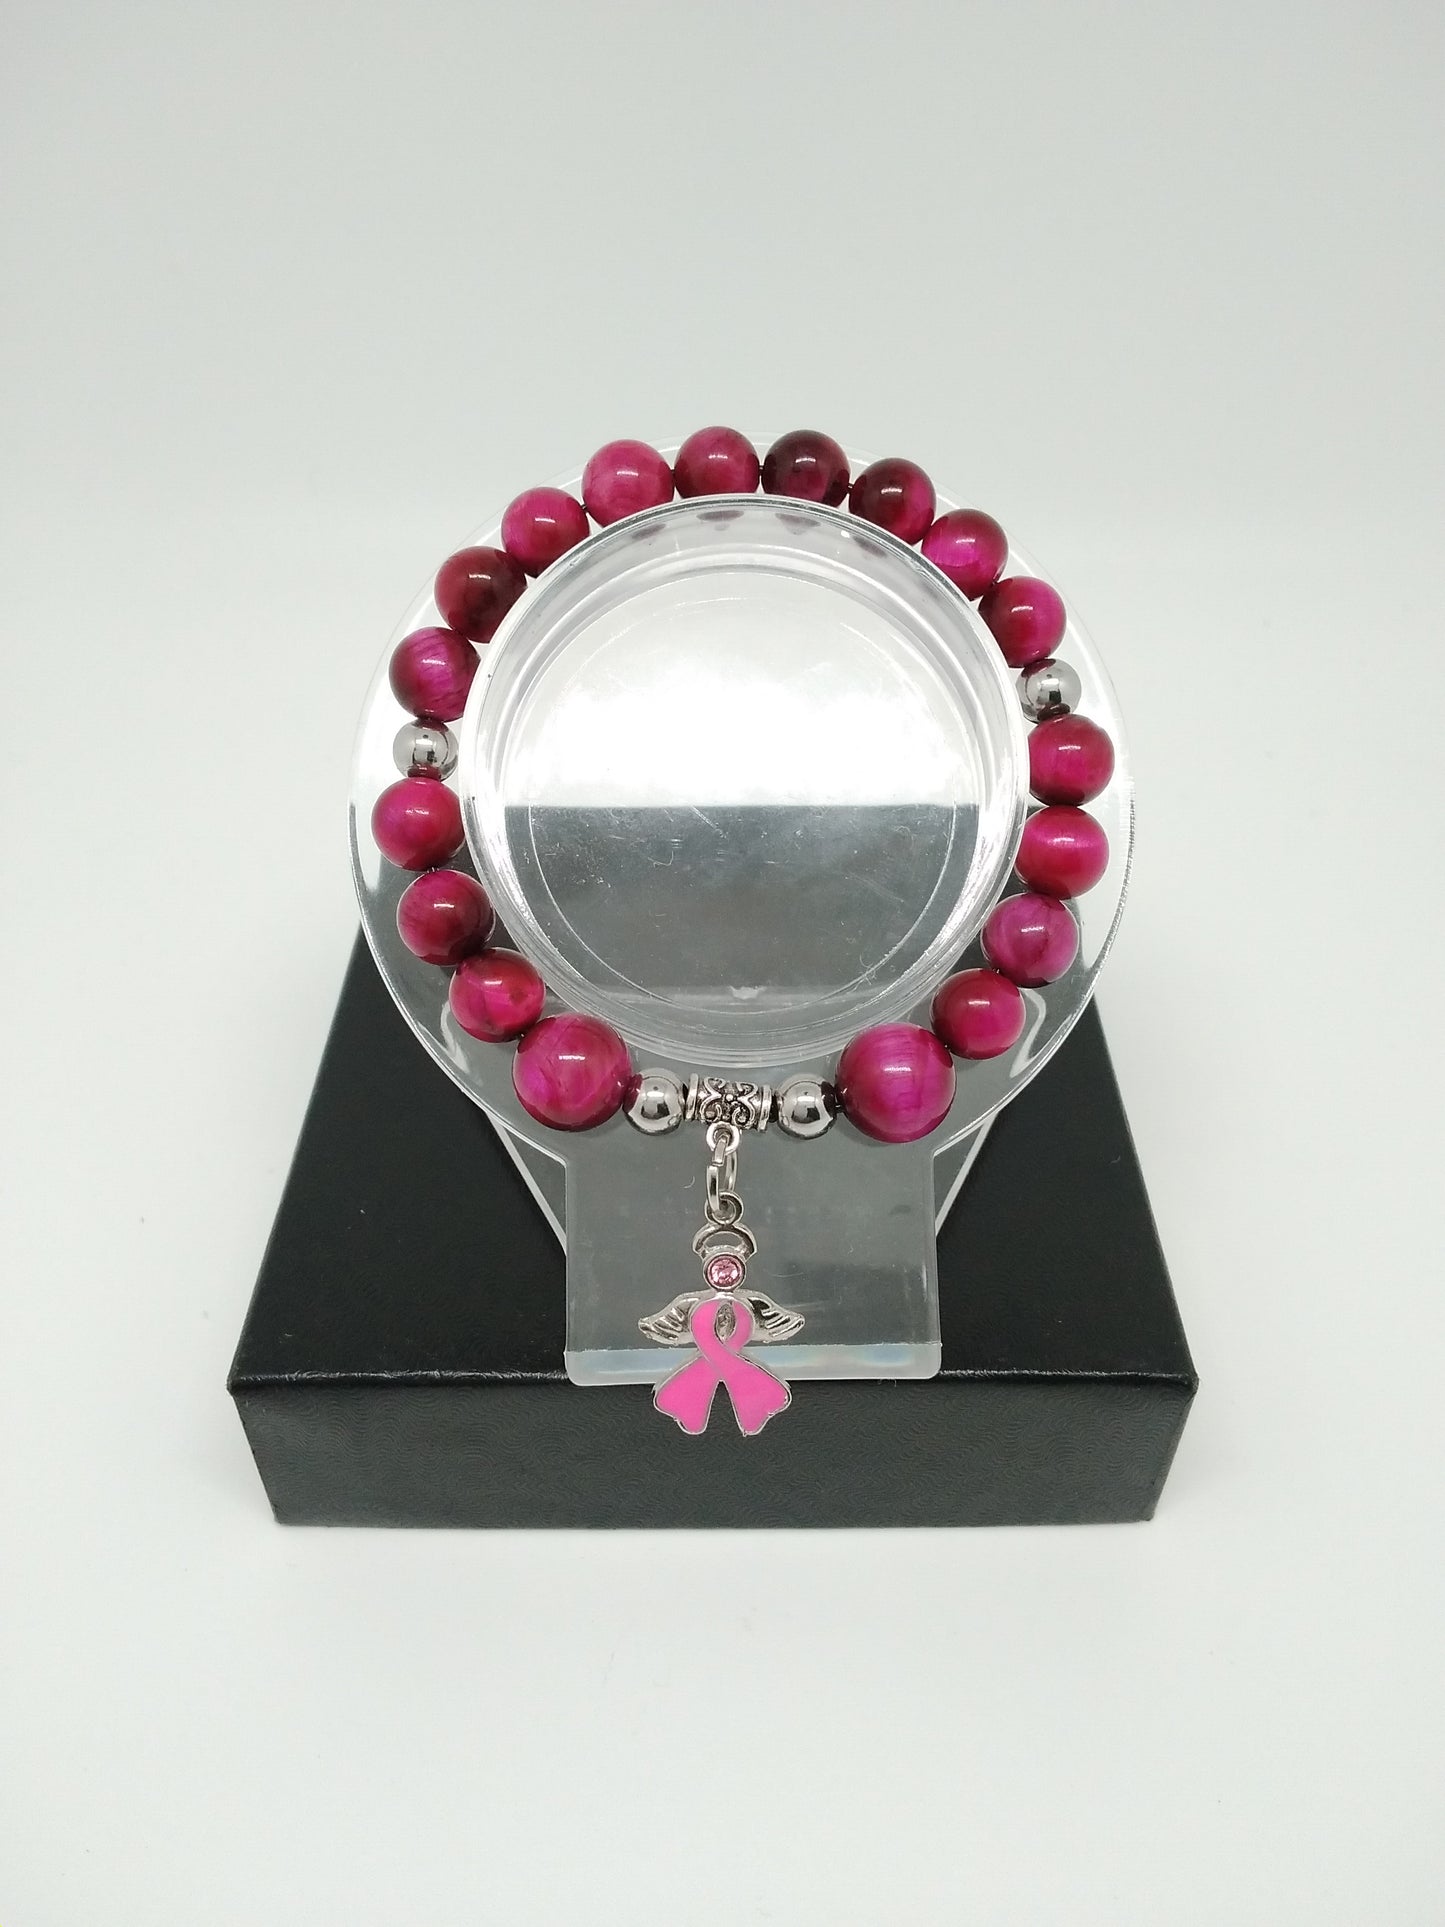 "I'm Always Here for You" Breast Cancer Awareness Bracelets